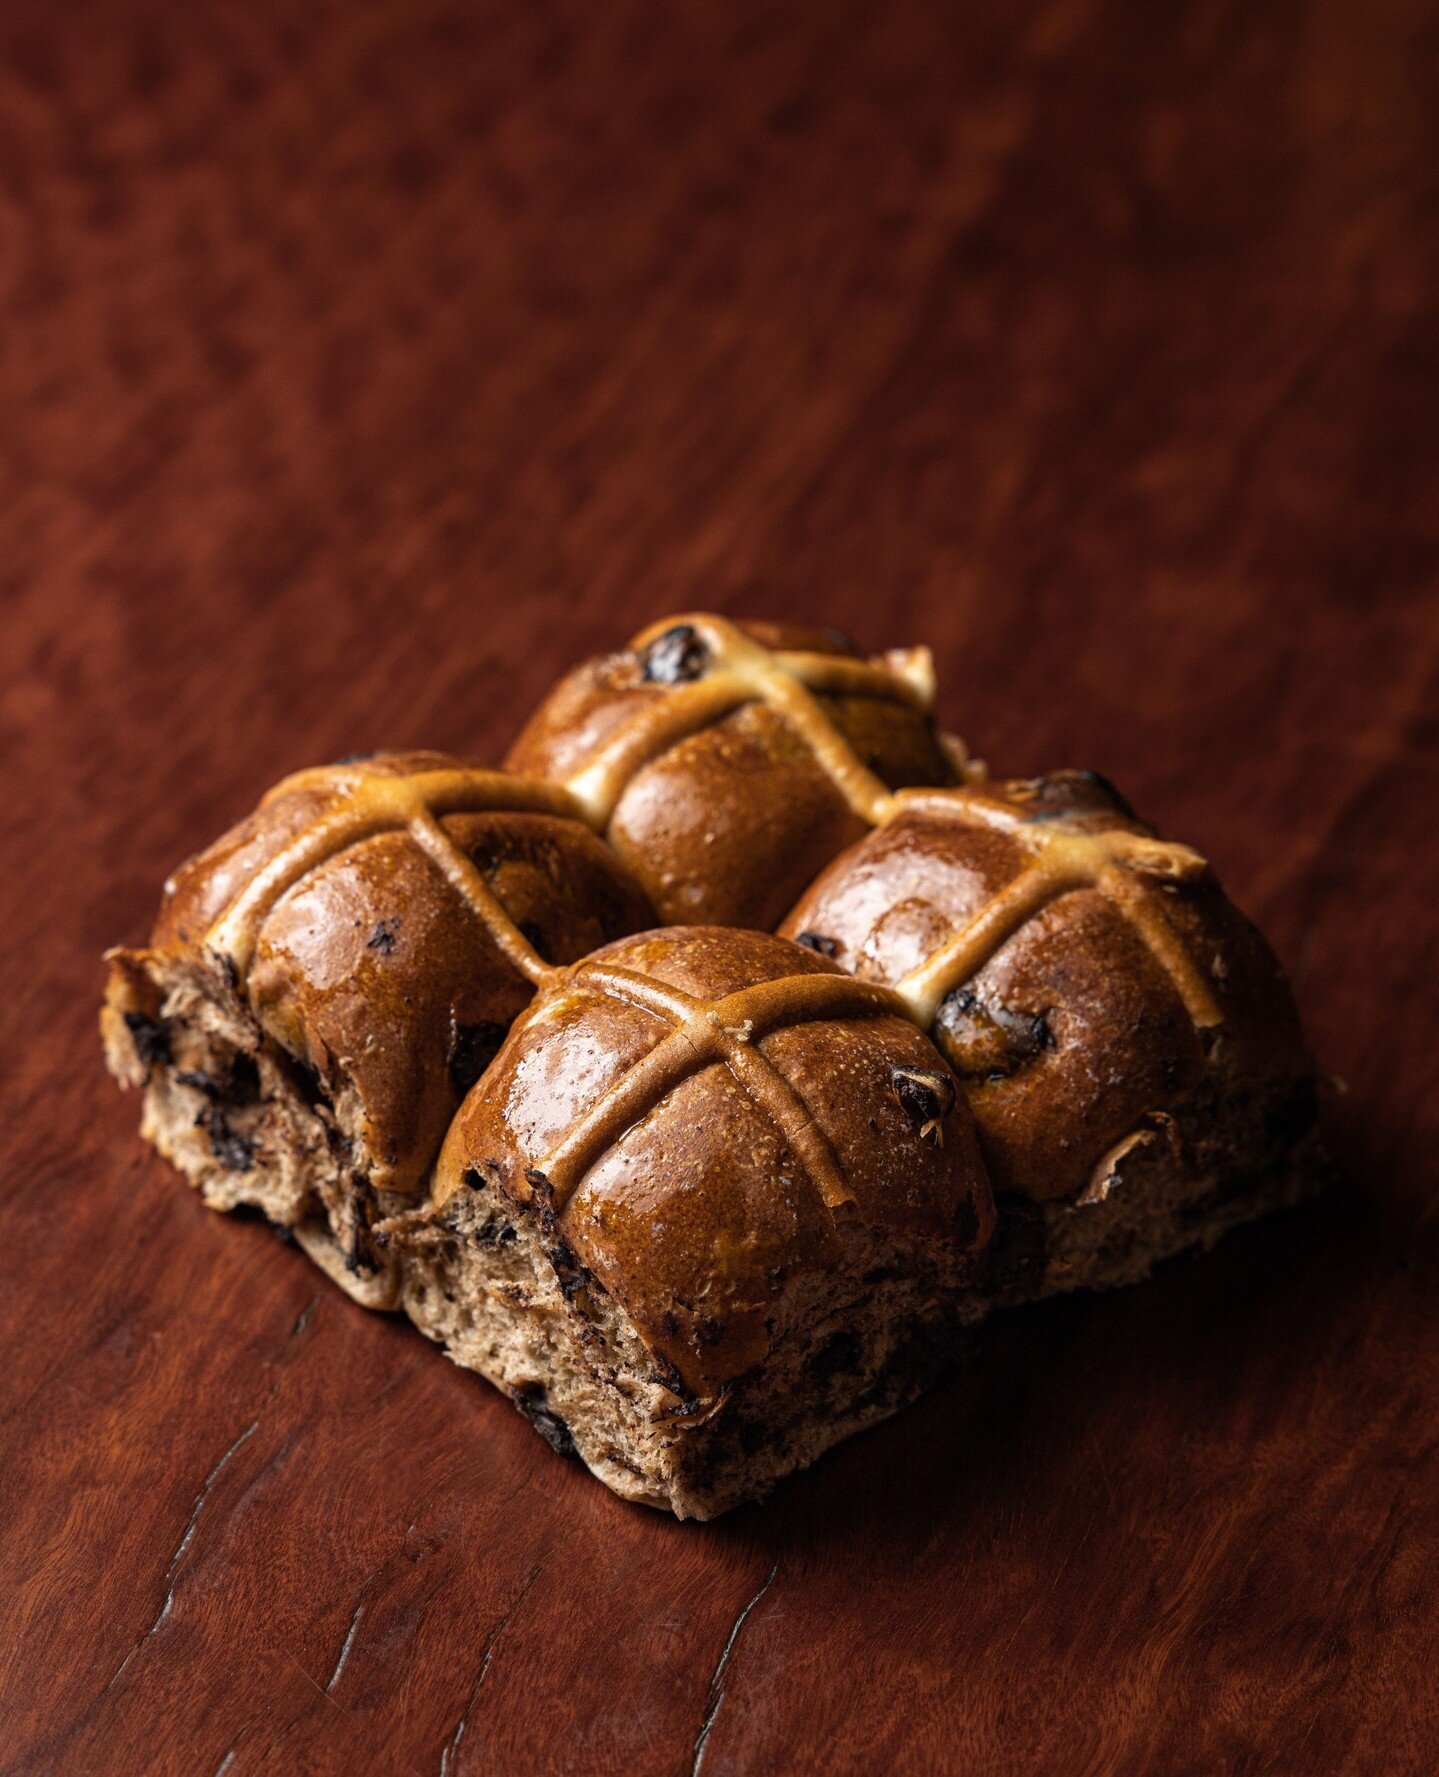 Hot cross buns of your dreams! Available at KSB until the 31st of March!⁠
Or order online via the link in bio and pick up so you don't miss out!⁠
⁠
⁠
#eastergift #easterdecor #easterbunny #sweettooth #eastertreats #easteregghunt #breakfast #eastergif